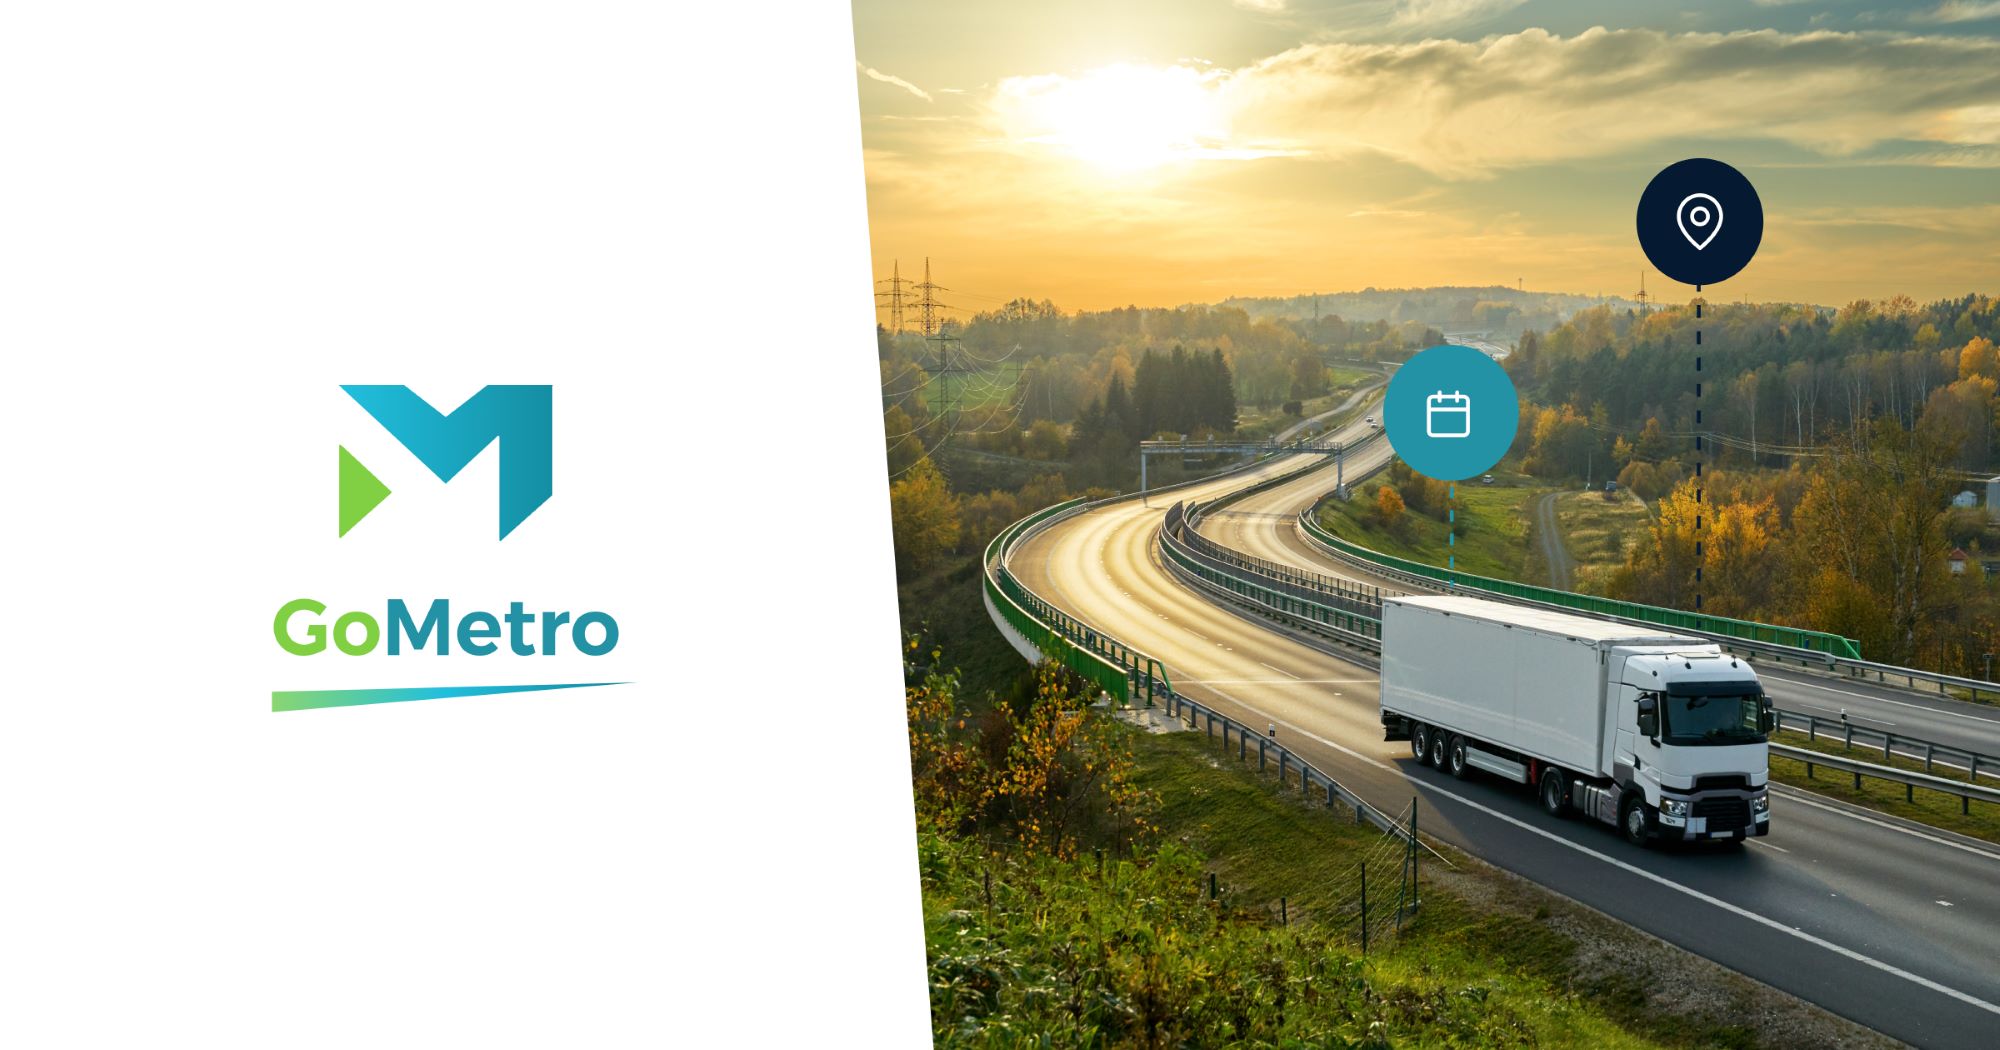 gometro-secures-9m-in-funding-for-fleet-management-optimization-software